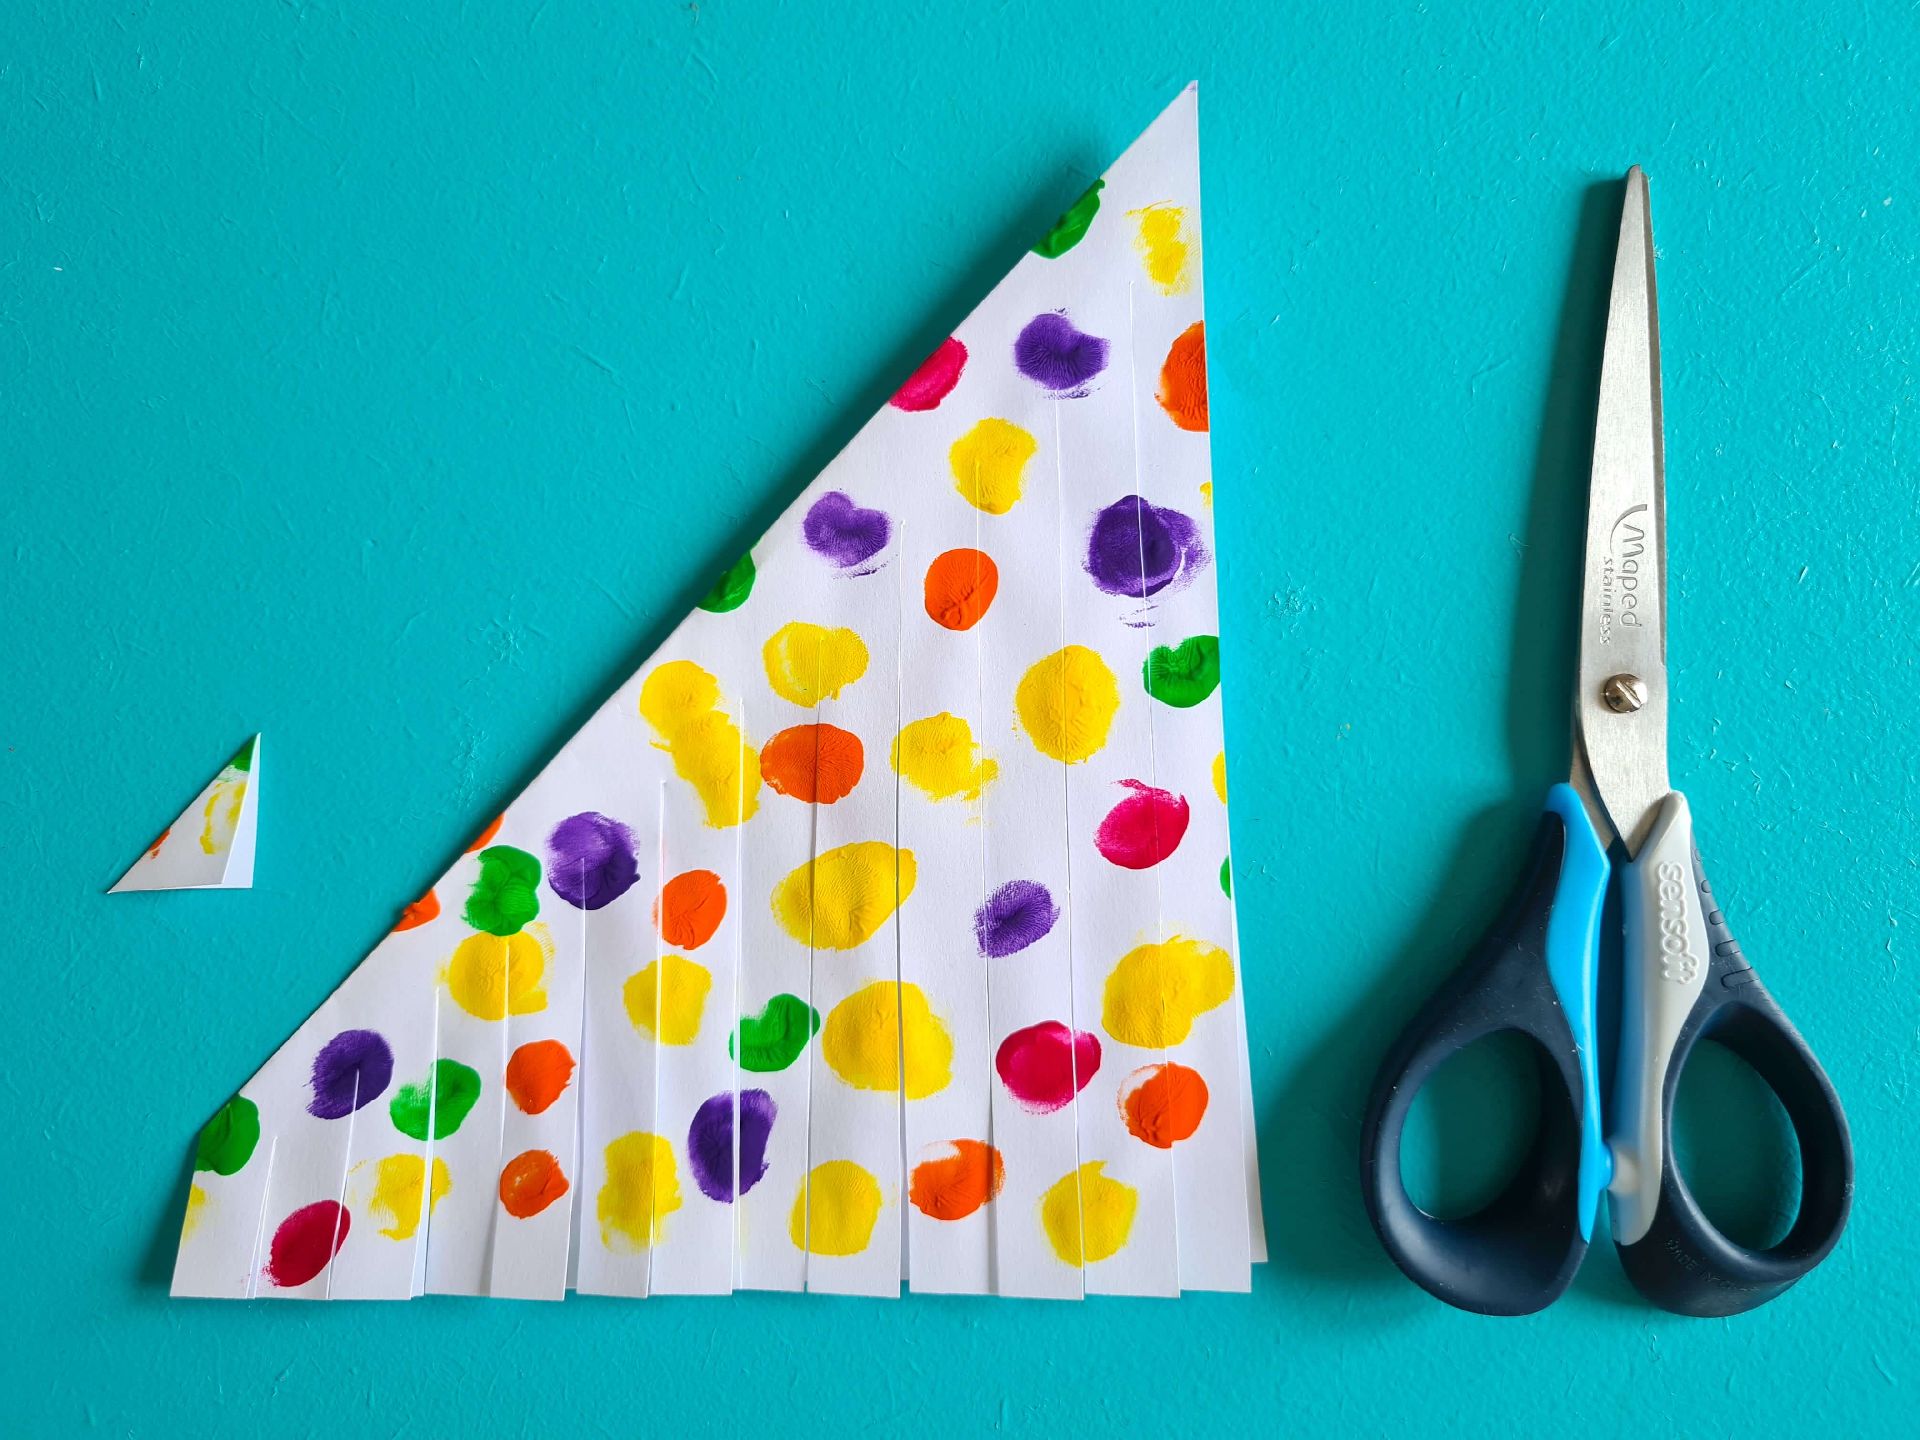 A sheet of paper with coloured dots painted on folded into a triangle with cuts through the paper